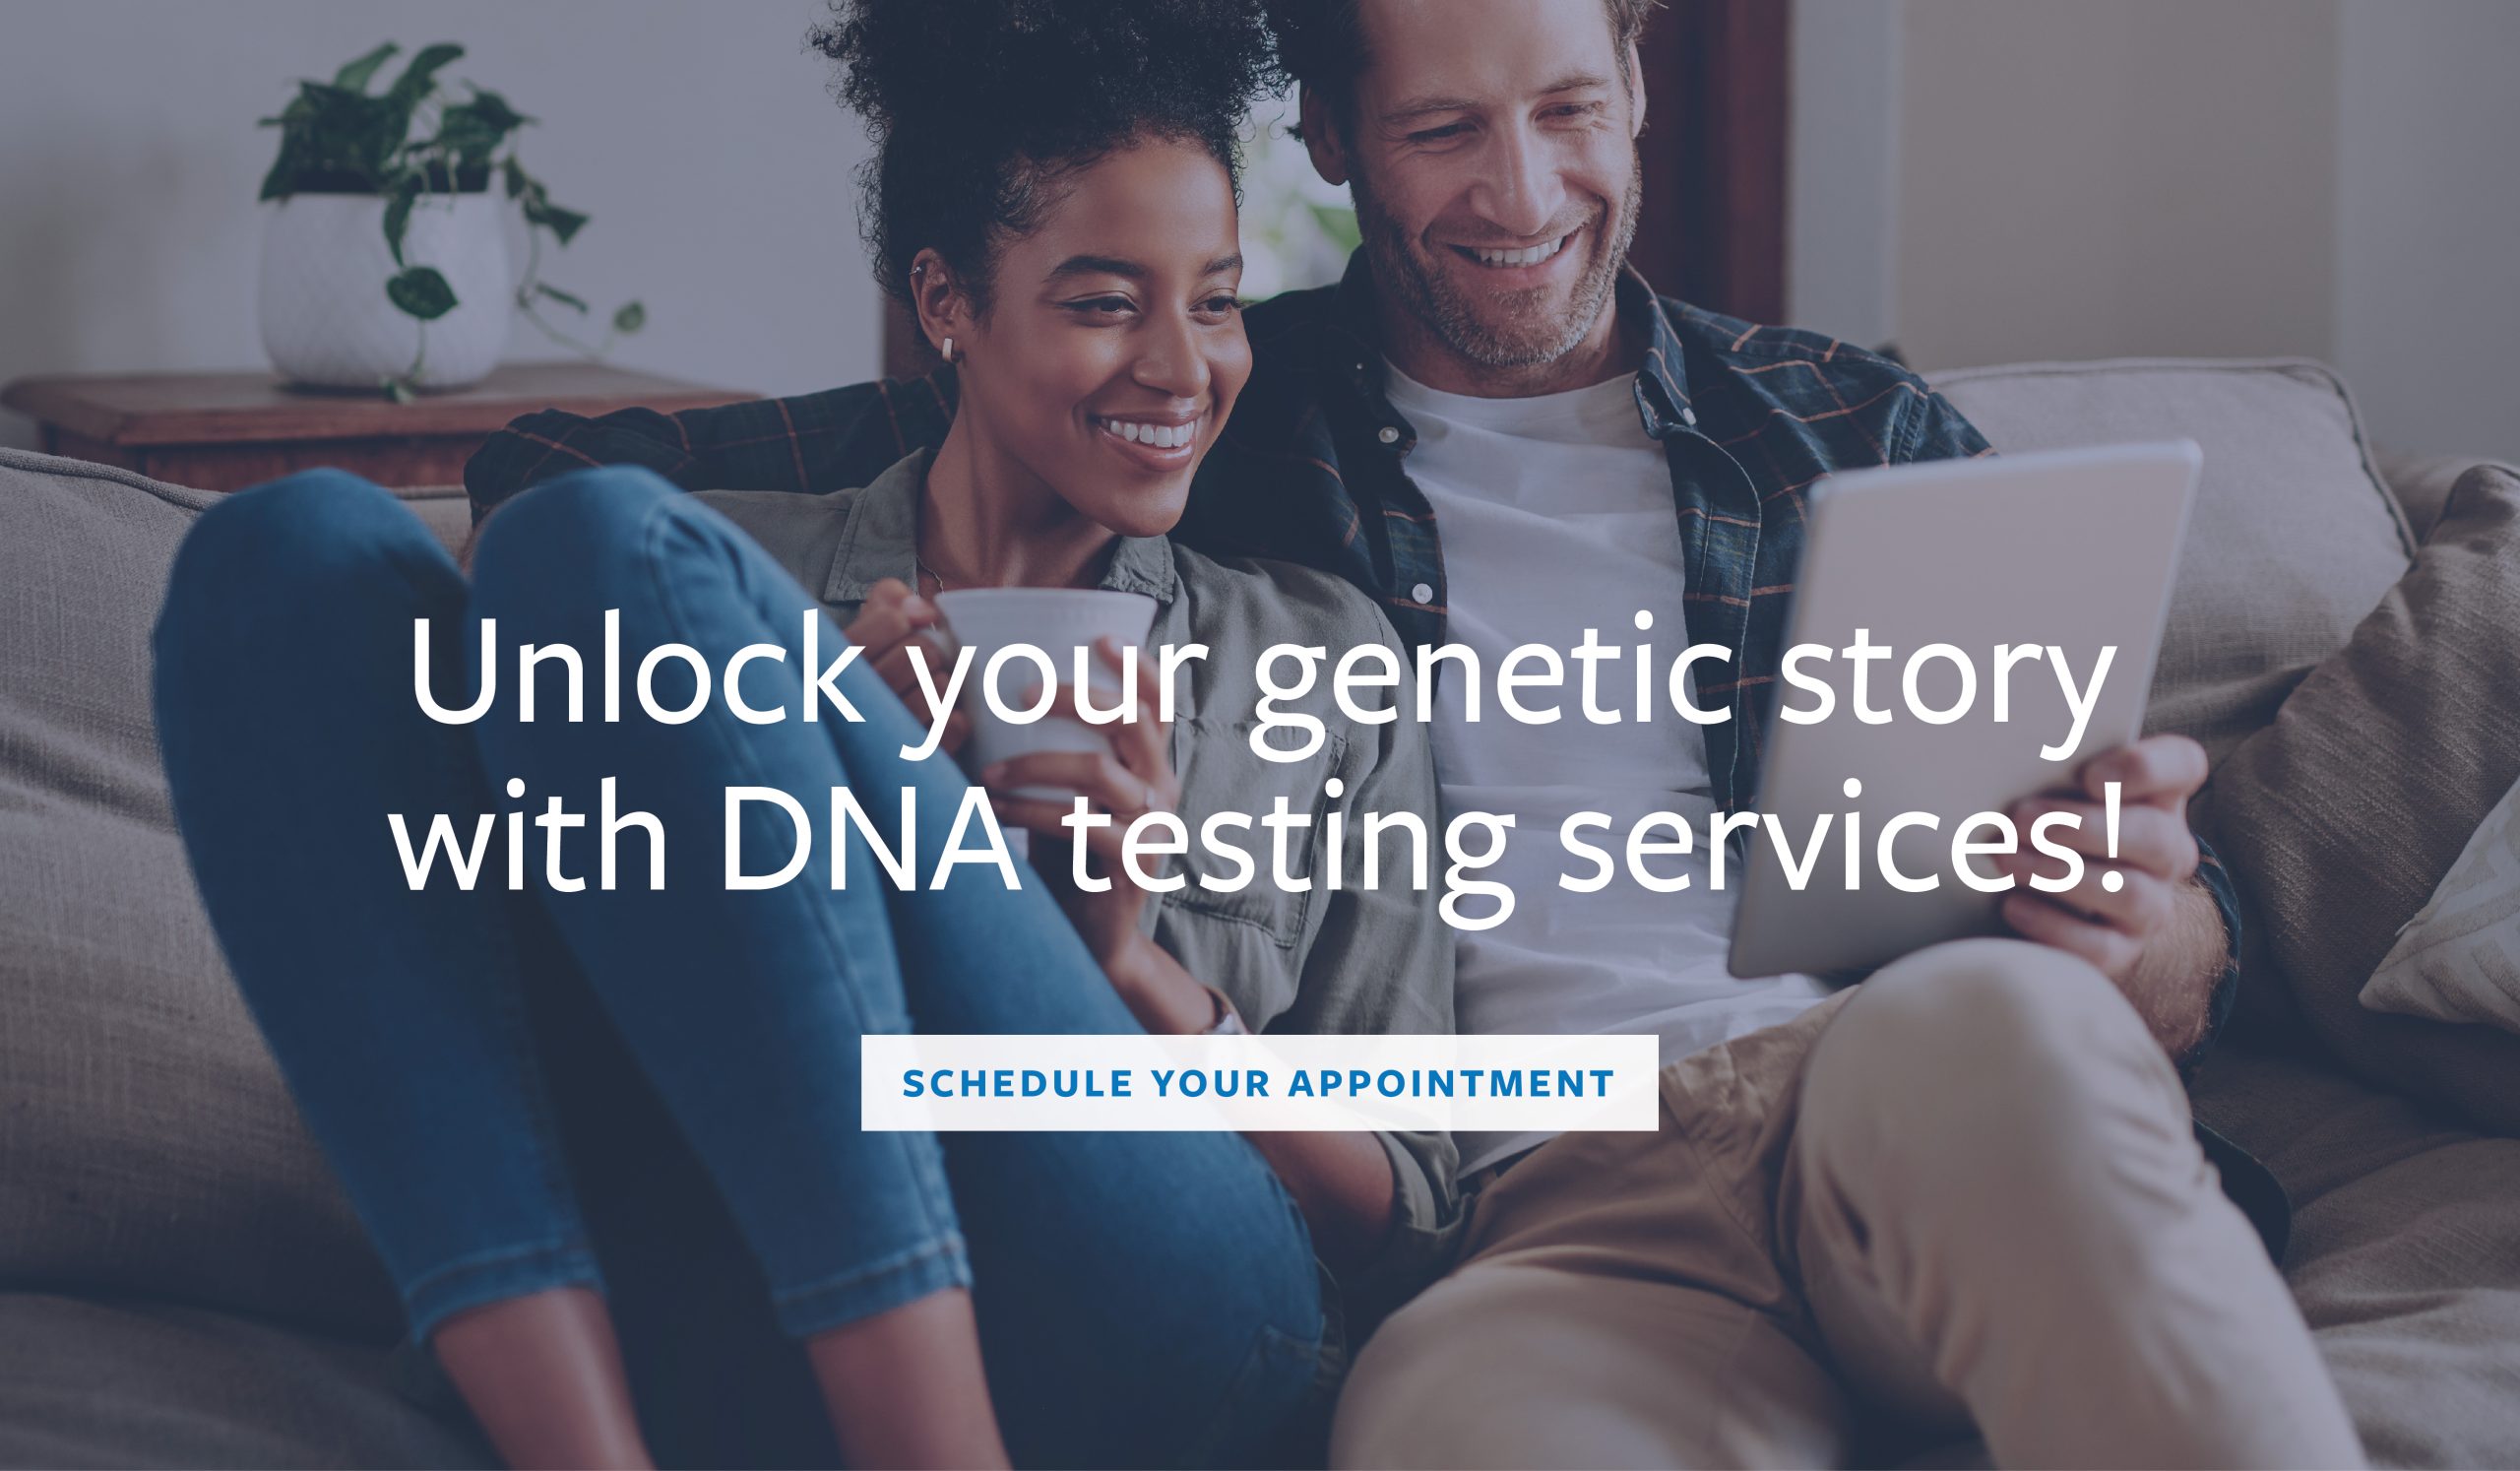 Unlock your genetic story with DNA testing services! Schedule your appointment.